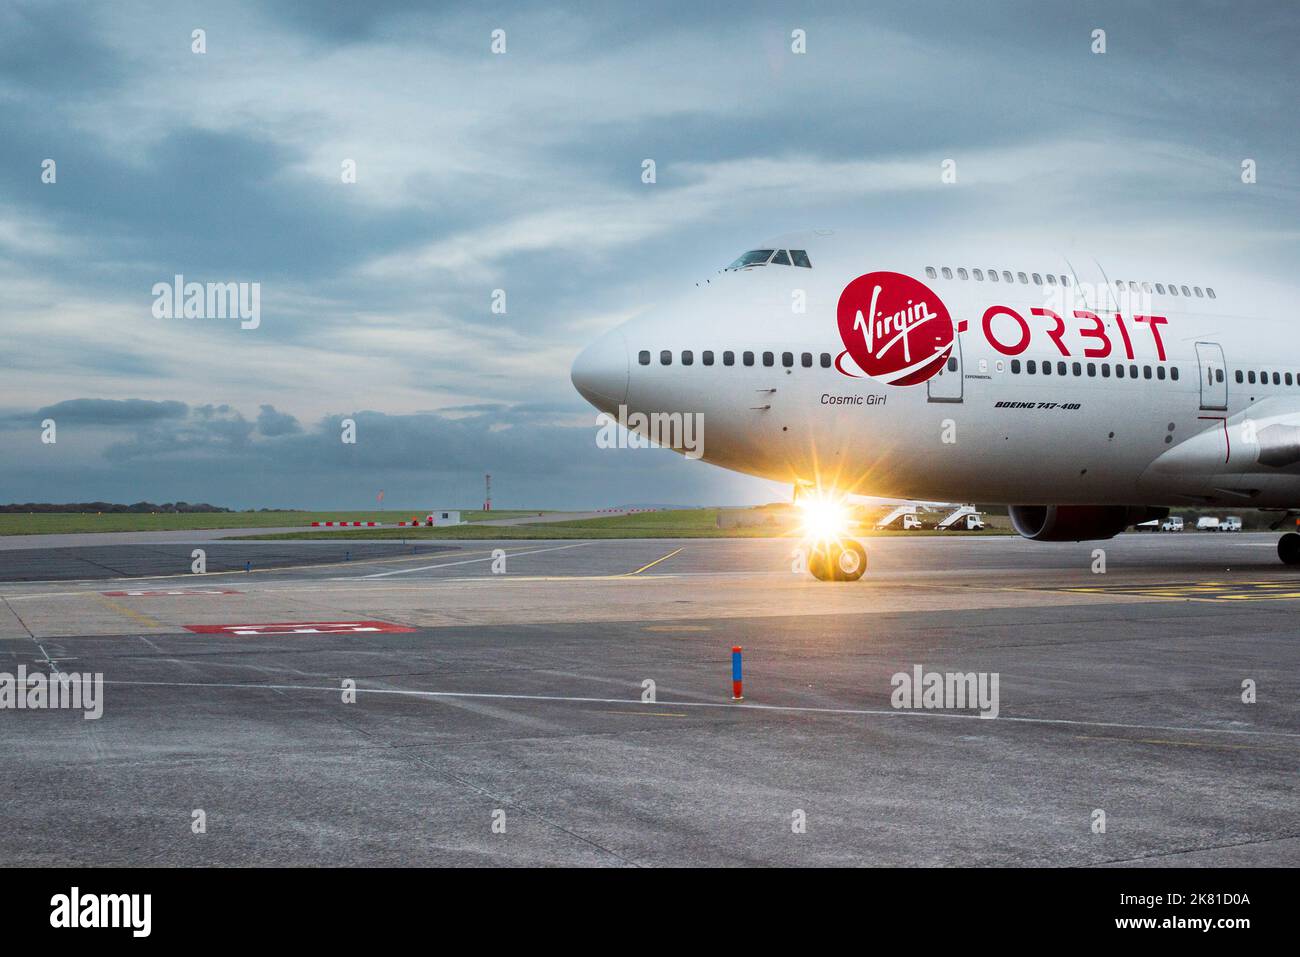 A closeup close up view of the Virgin logo on the fuselage of the Virgin Orbit, Cosmic Girl, a 747-400 converted to a rocket launch platform taxiing t Stock Photo